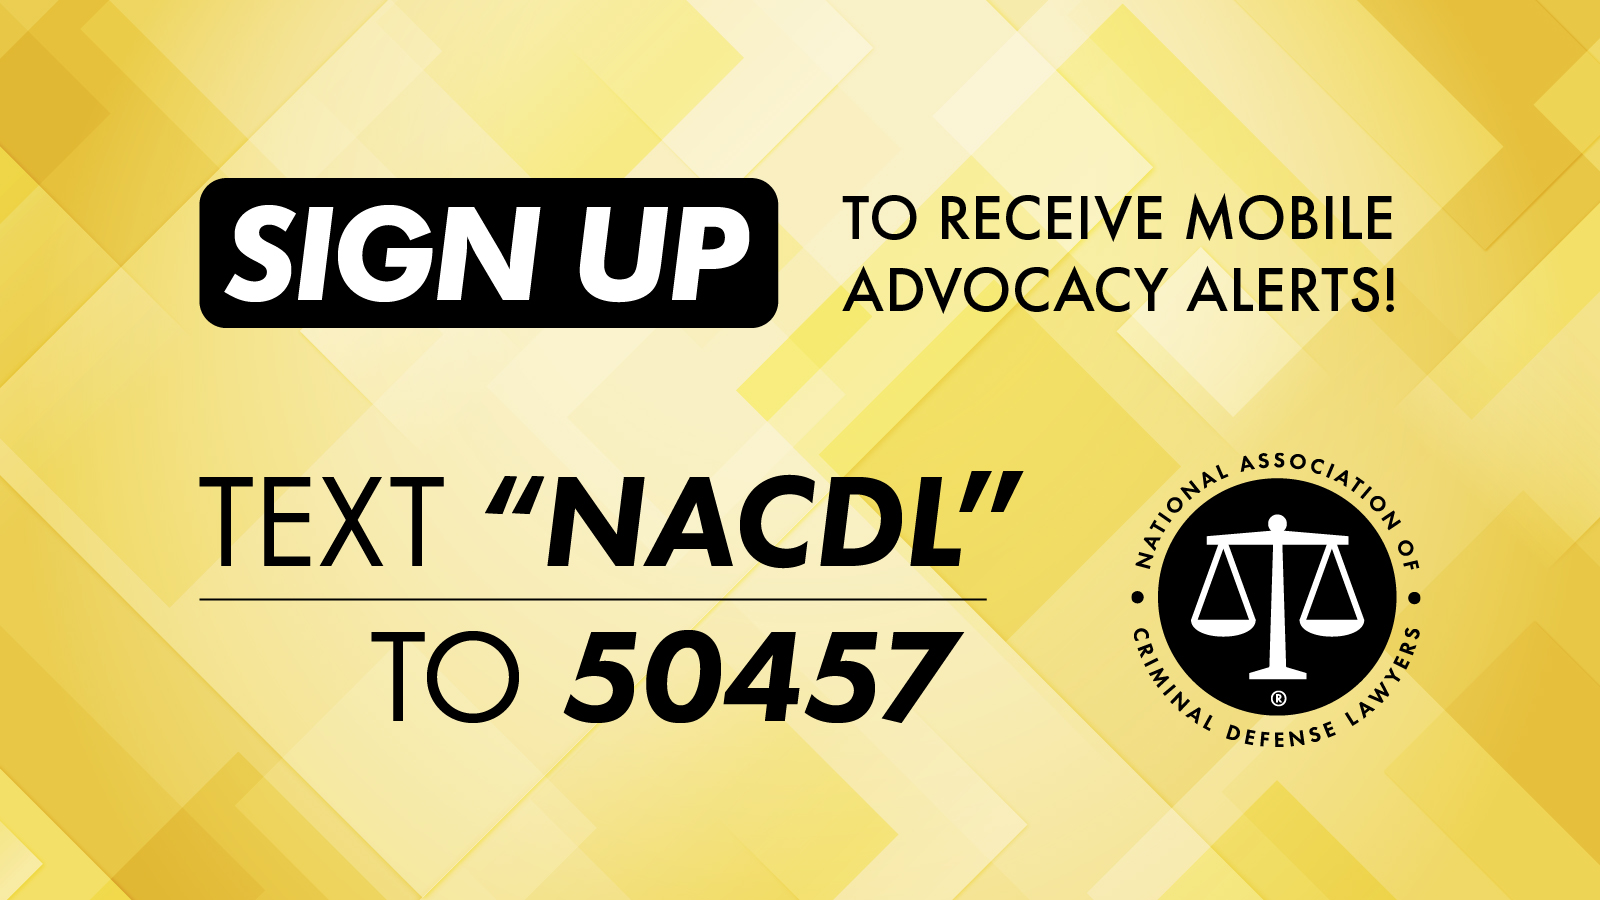 Sign up to receive mobile advocacy alerts! Text "NACDL" to 50457 and follow the link to register for text alerts about urgent legislative actions in your state.